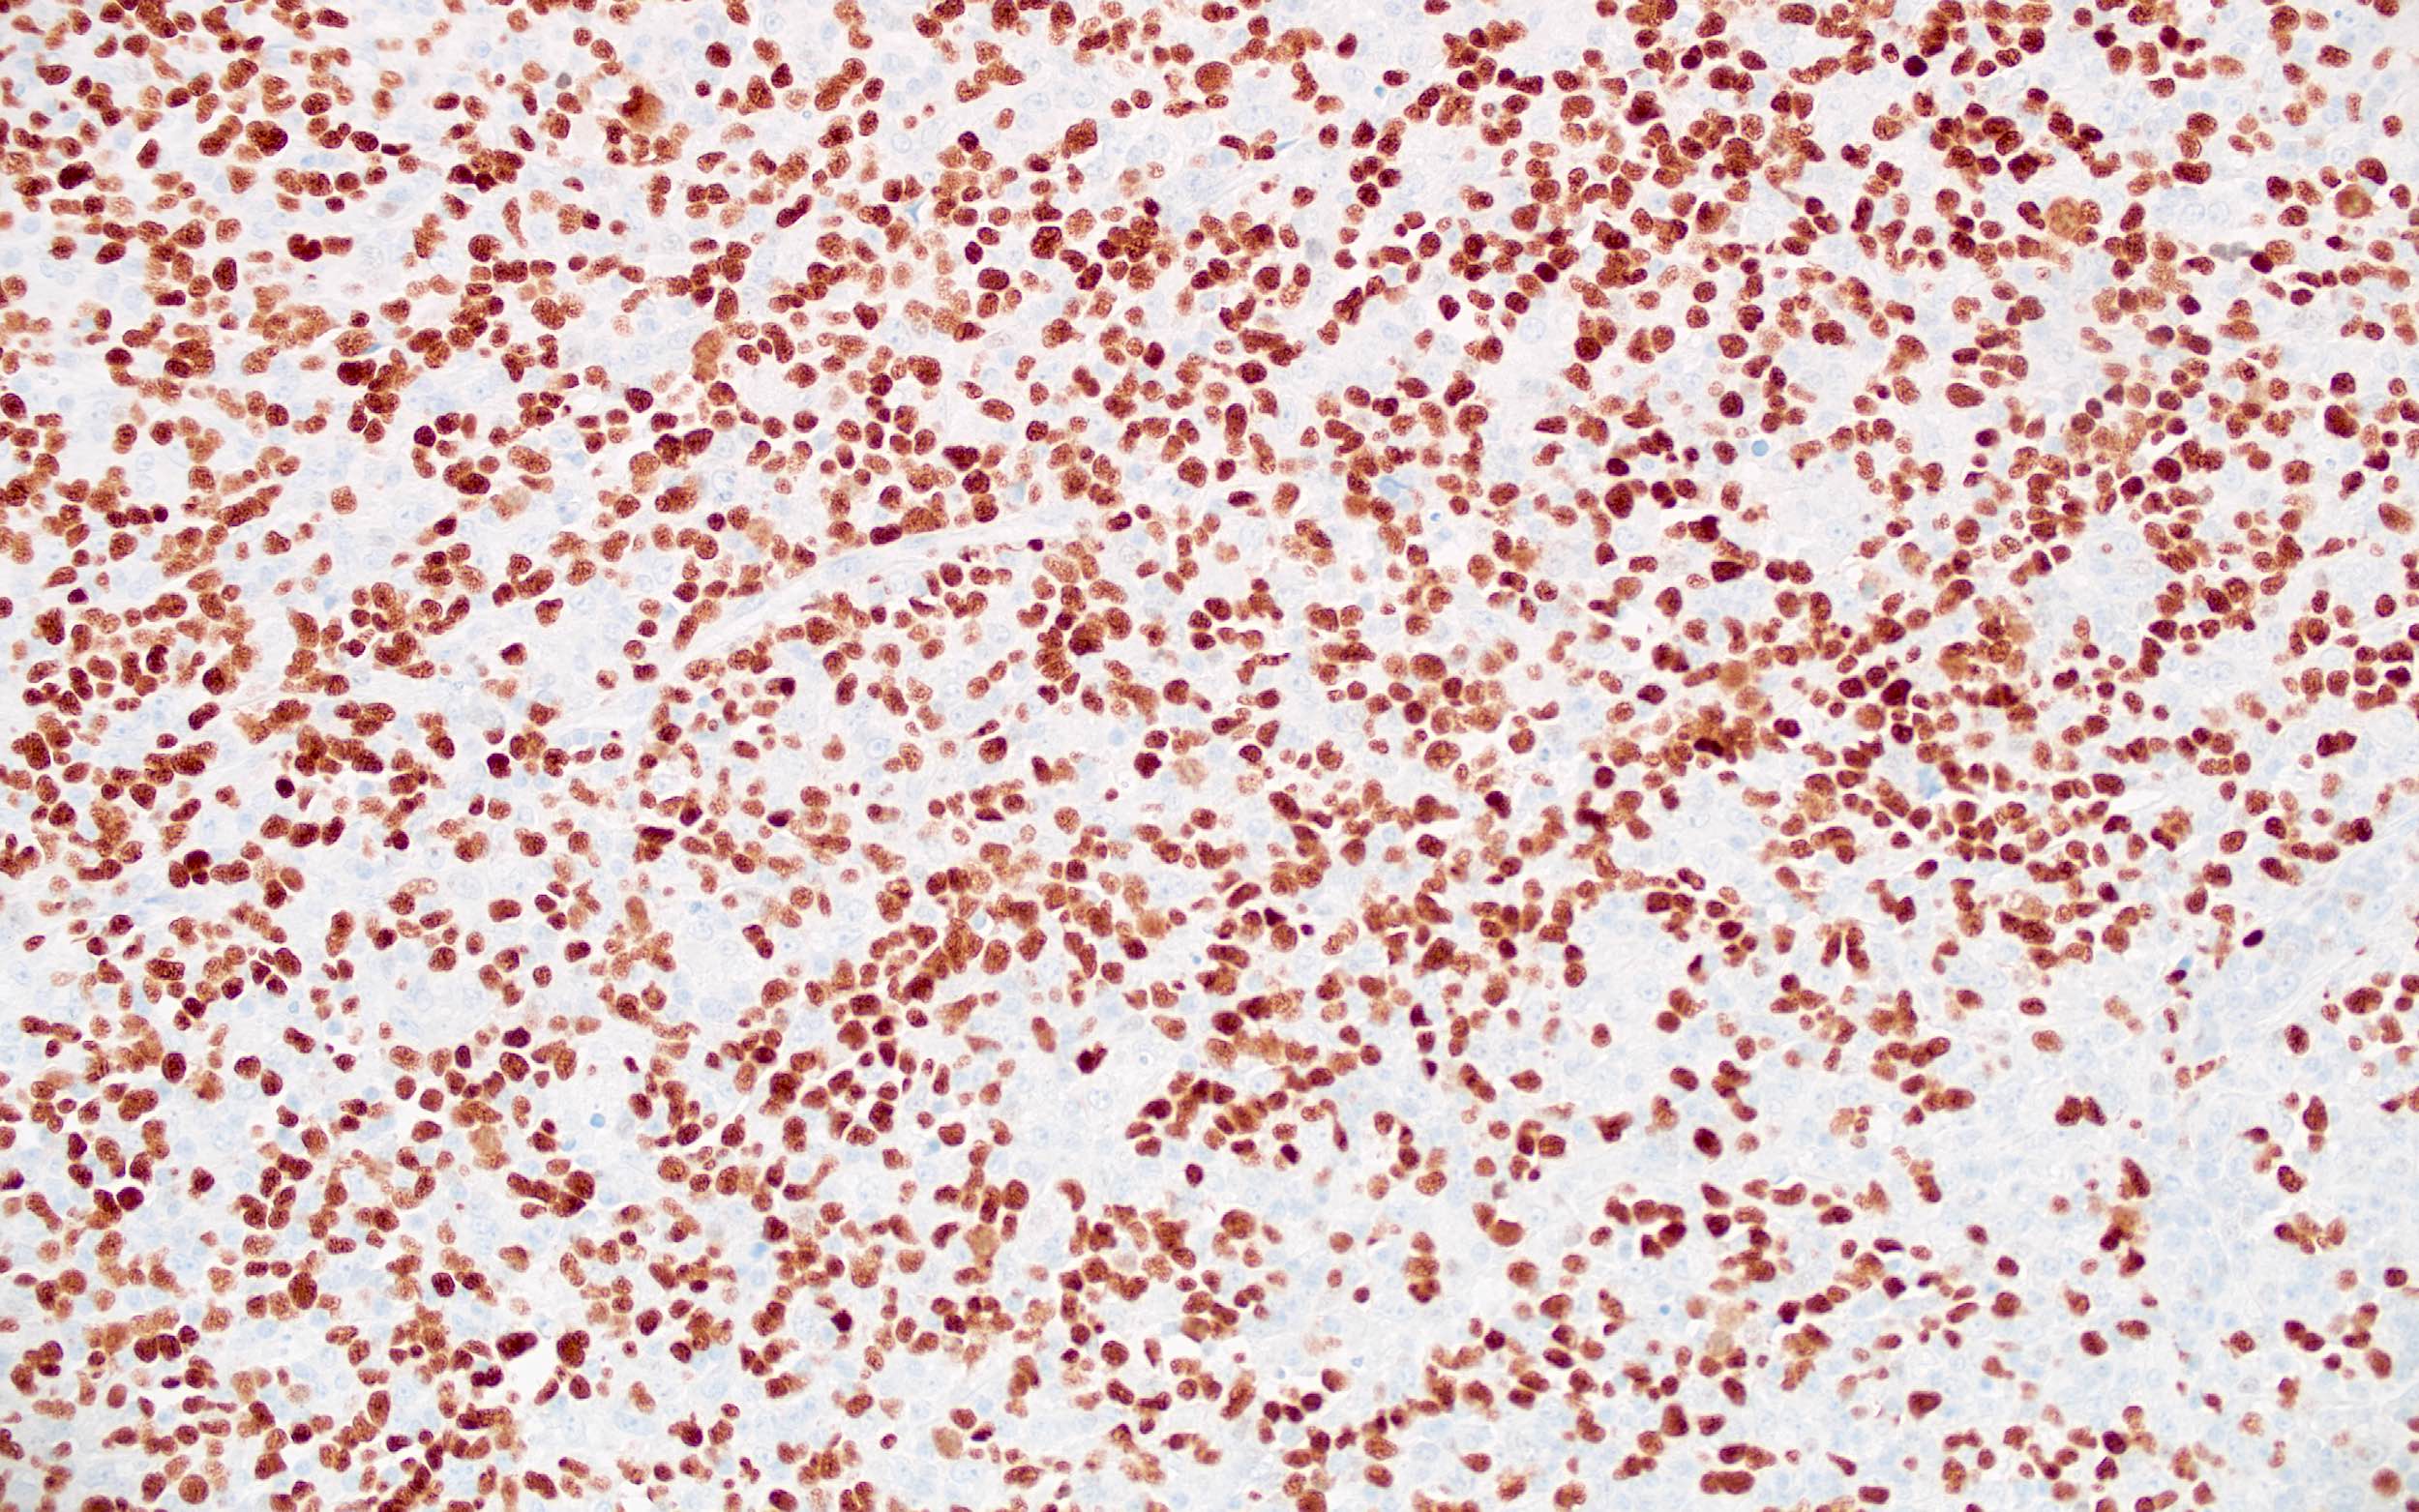 Large atypical cells of DLBCL, OCT2+